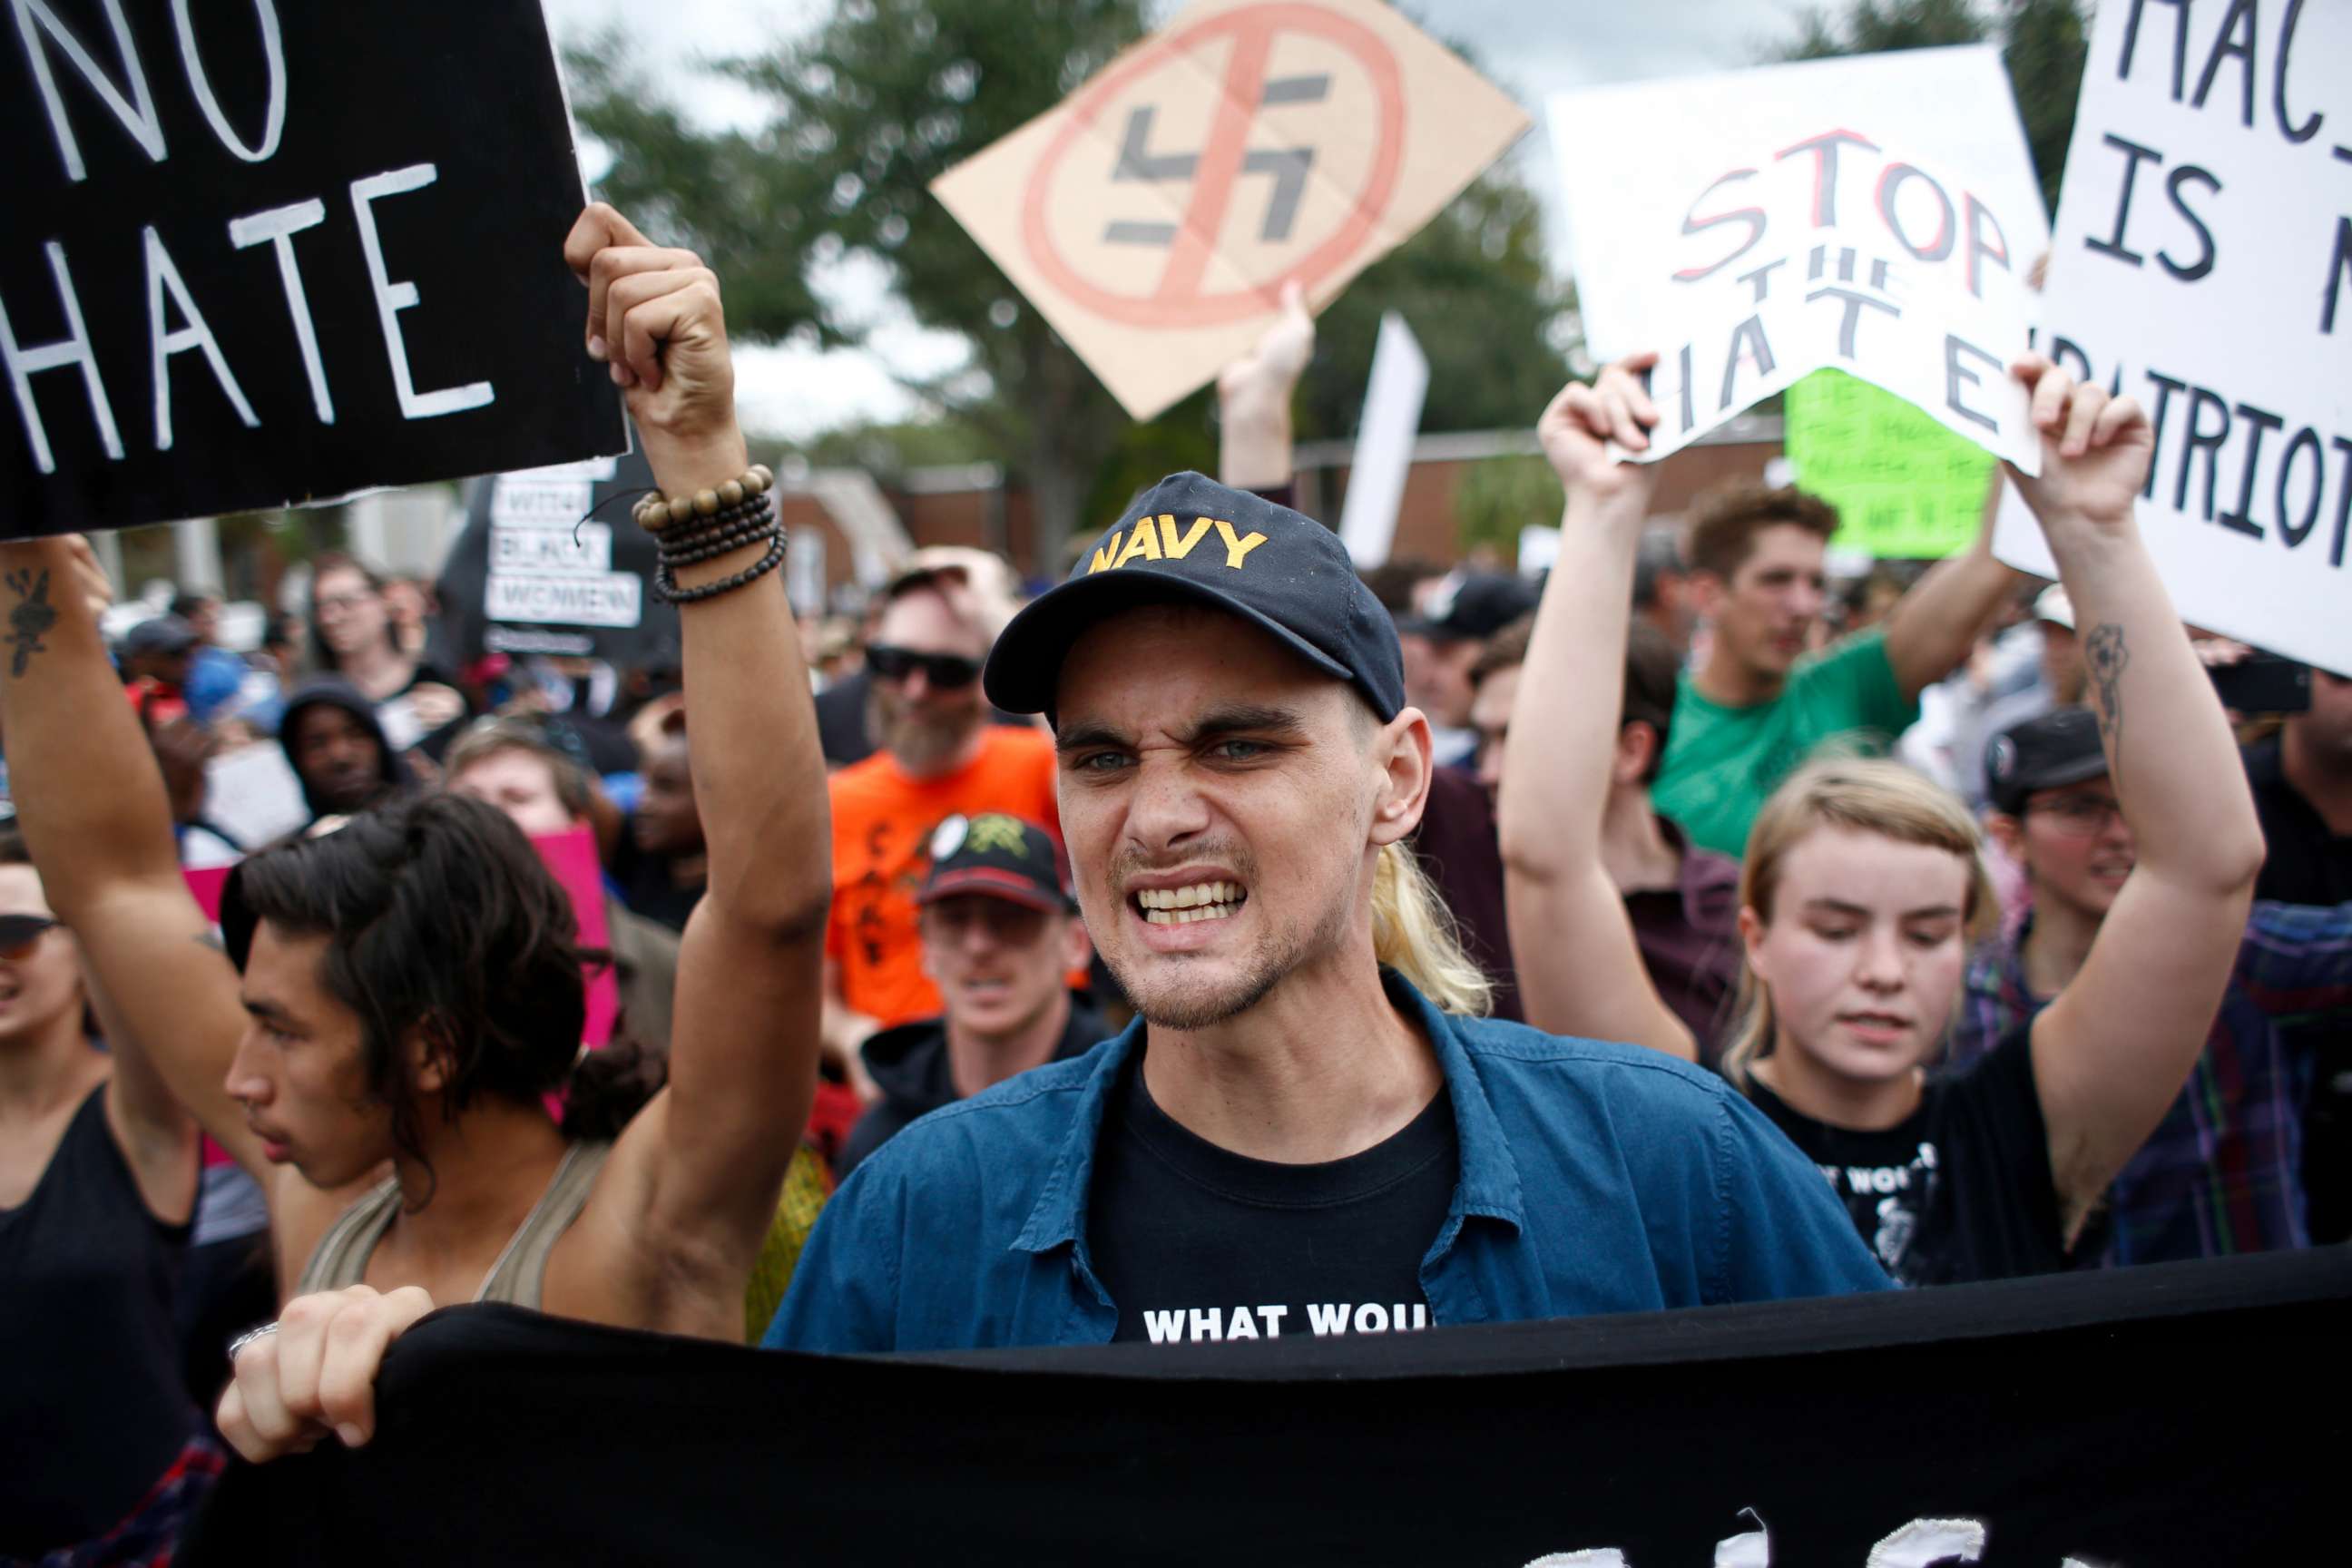 PHOTO: Demonstrators gather at the site of a planned speech by white nationalist Richard Spencer, who popularized the term 'alt-right', at the University of Florida campus, Oct. 19, 2017, in Gainesville, Florida.